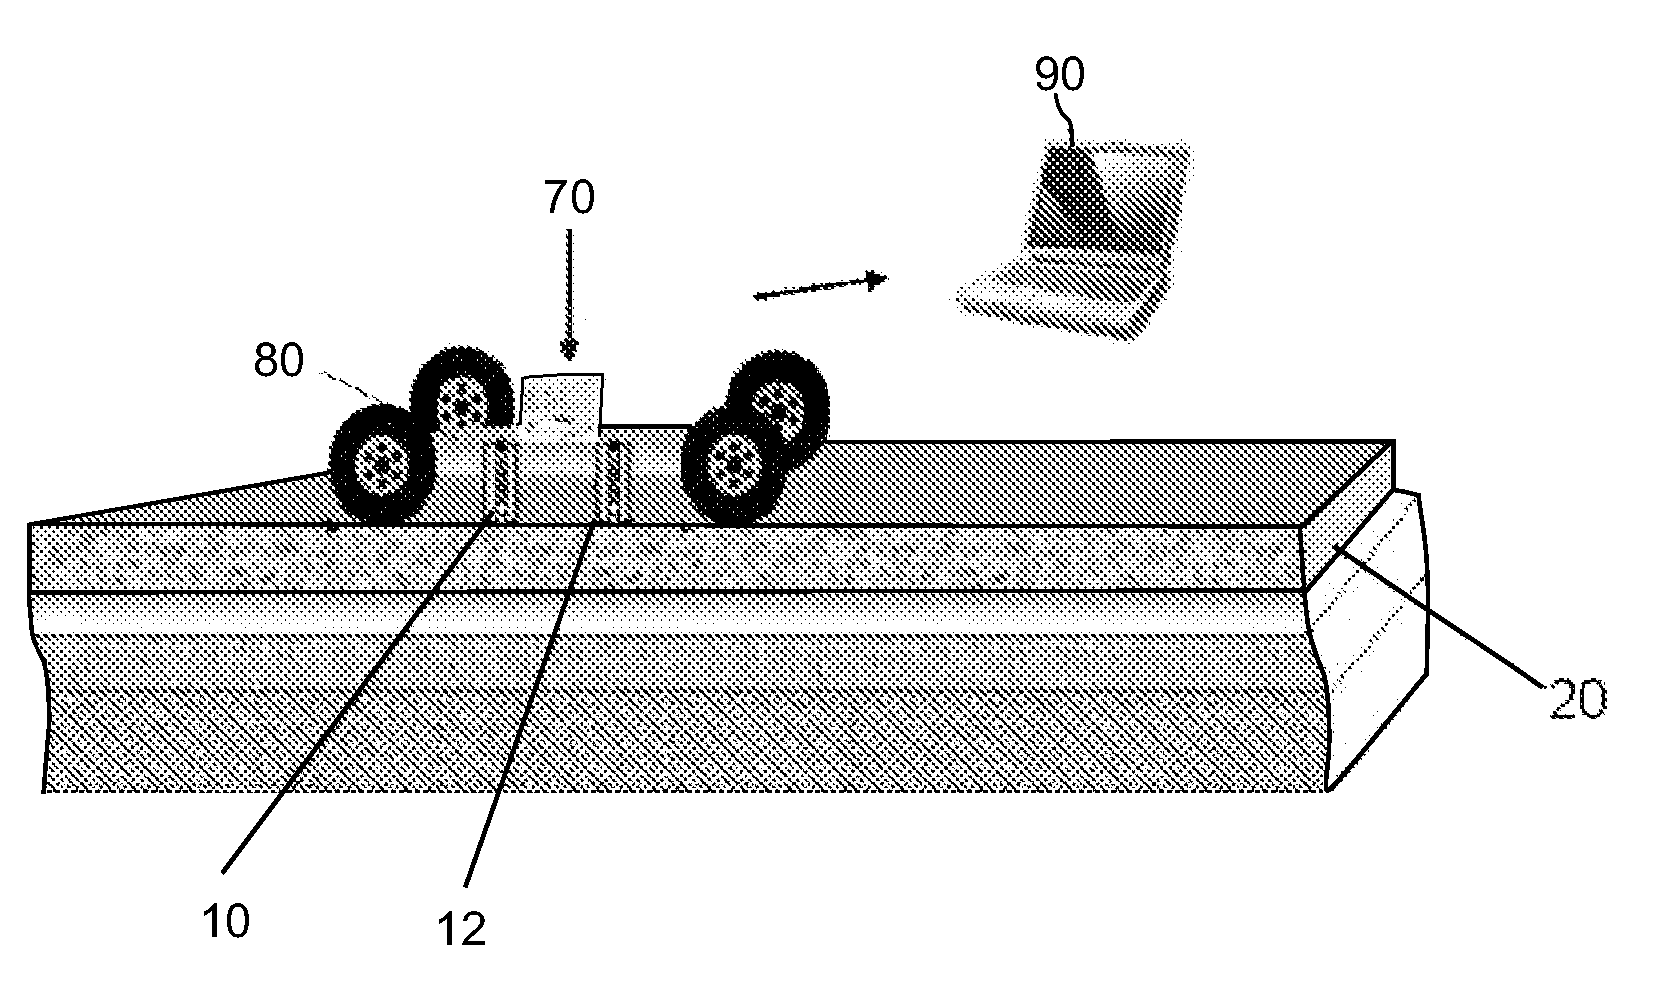 Method and apparatus for nondestructive evaluation and monitoring of materials and structures